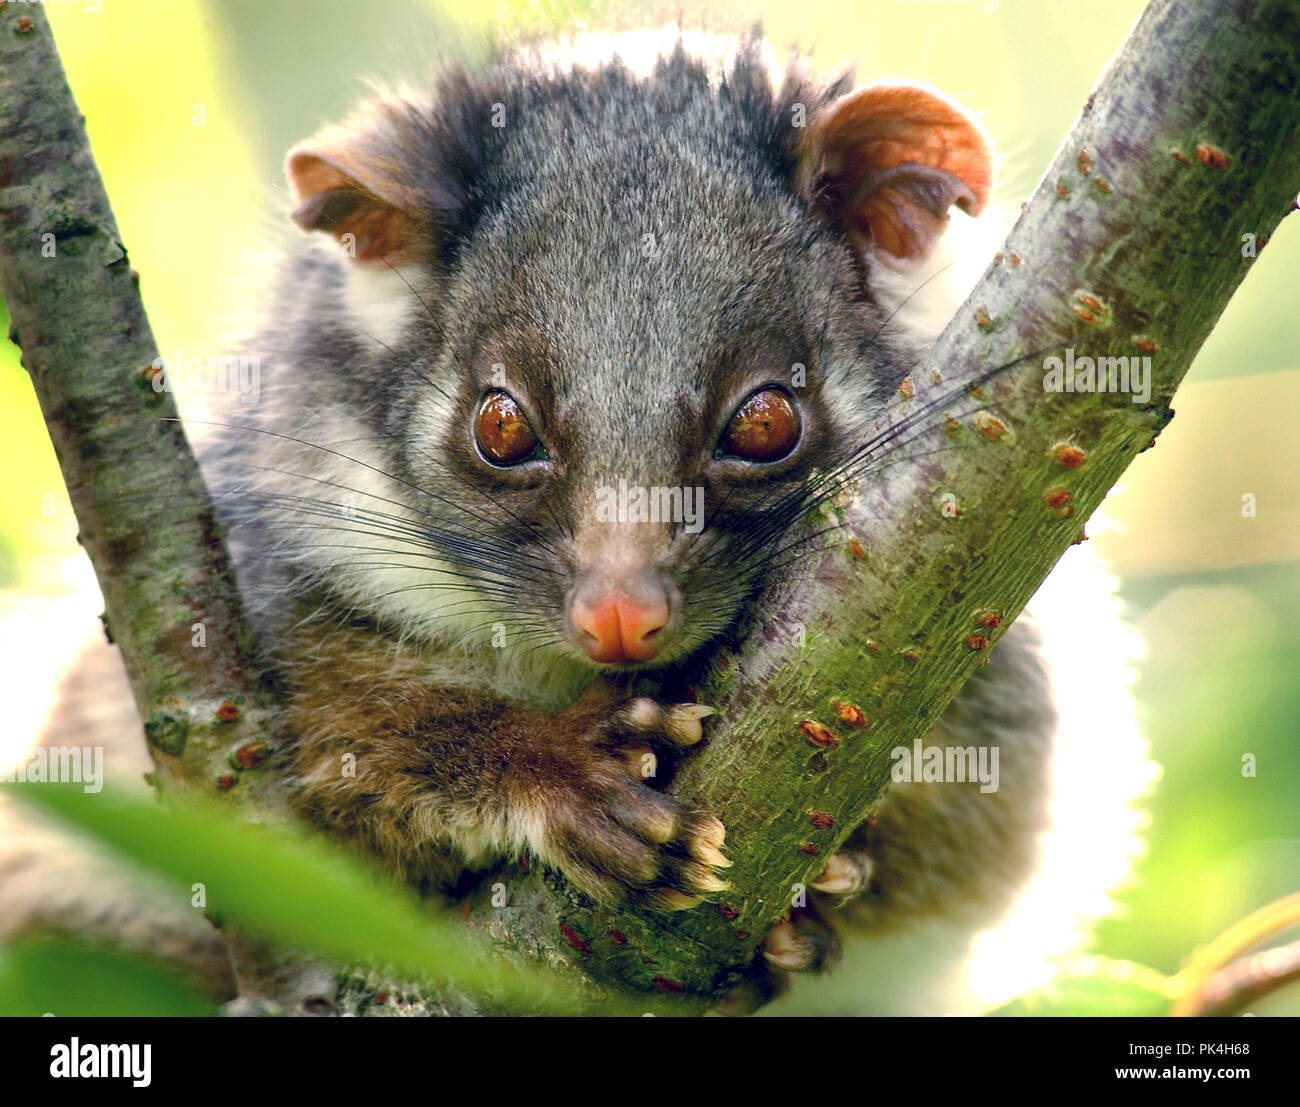 Ringtail possum in a backyard Japanese Maple.  The ringtail possum is common in eastern Australia but usually only at night. Stock Photo